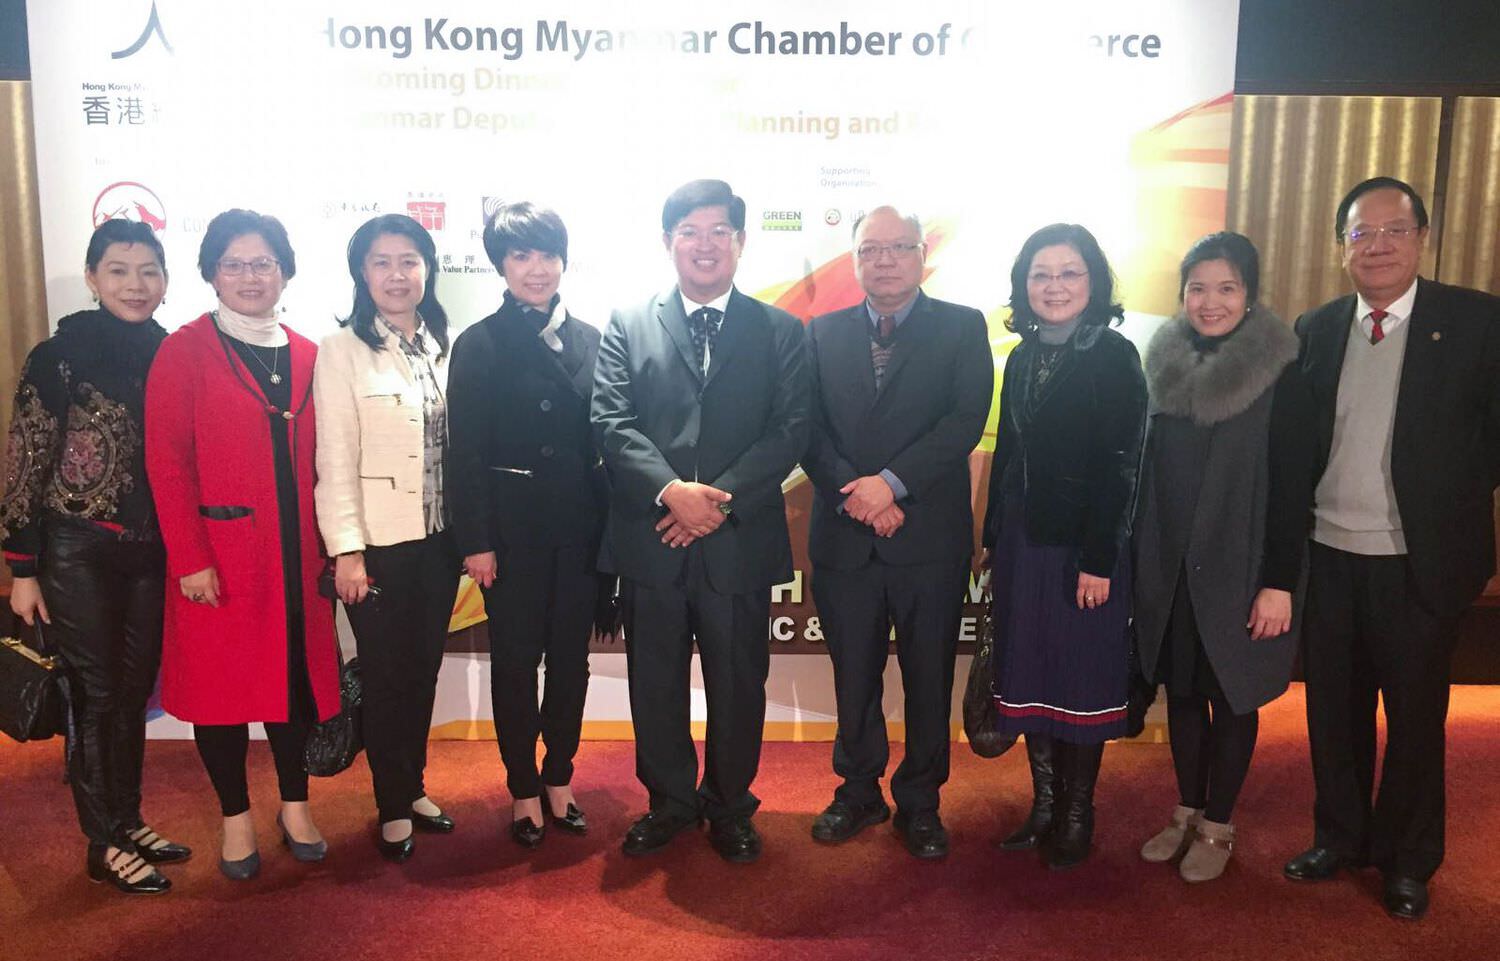 CB and the Hong Kong Myanmar Chamber of Commerce signed a memorandum of understanding to establish a scholarship for students from Myanmar